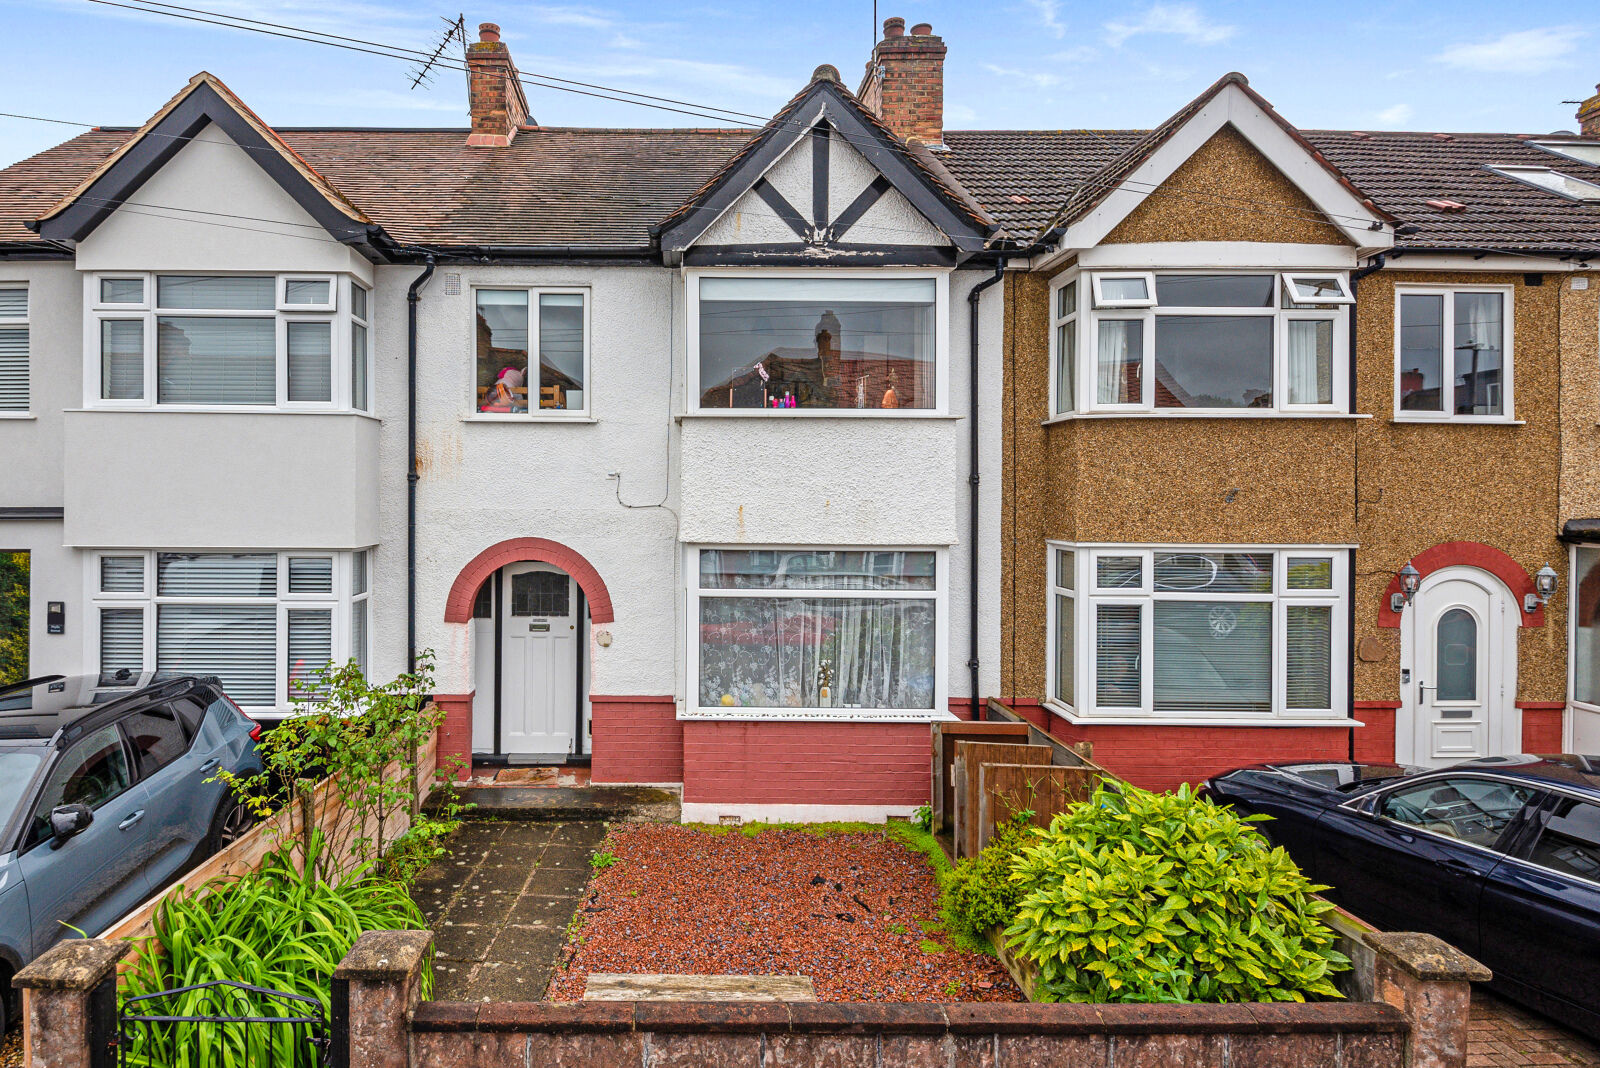 3 bedroom mid terraced house for sale Phyllis Avenue, New Malden, KT3, main image